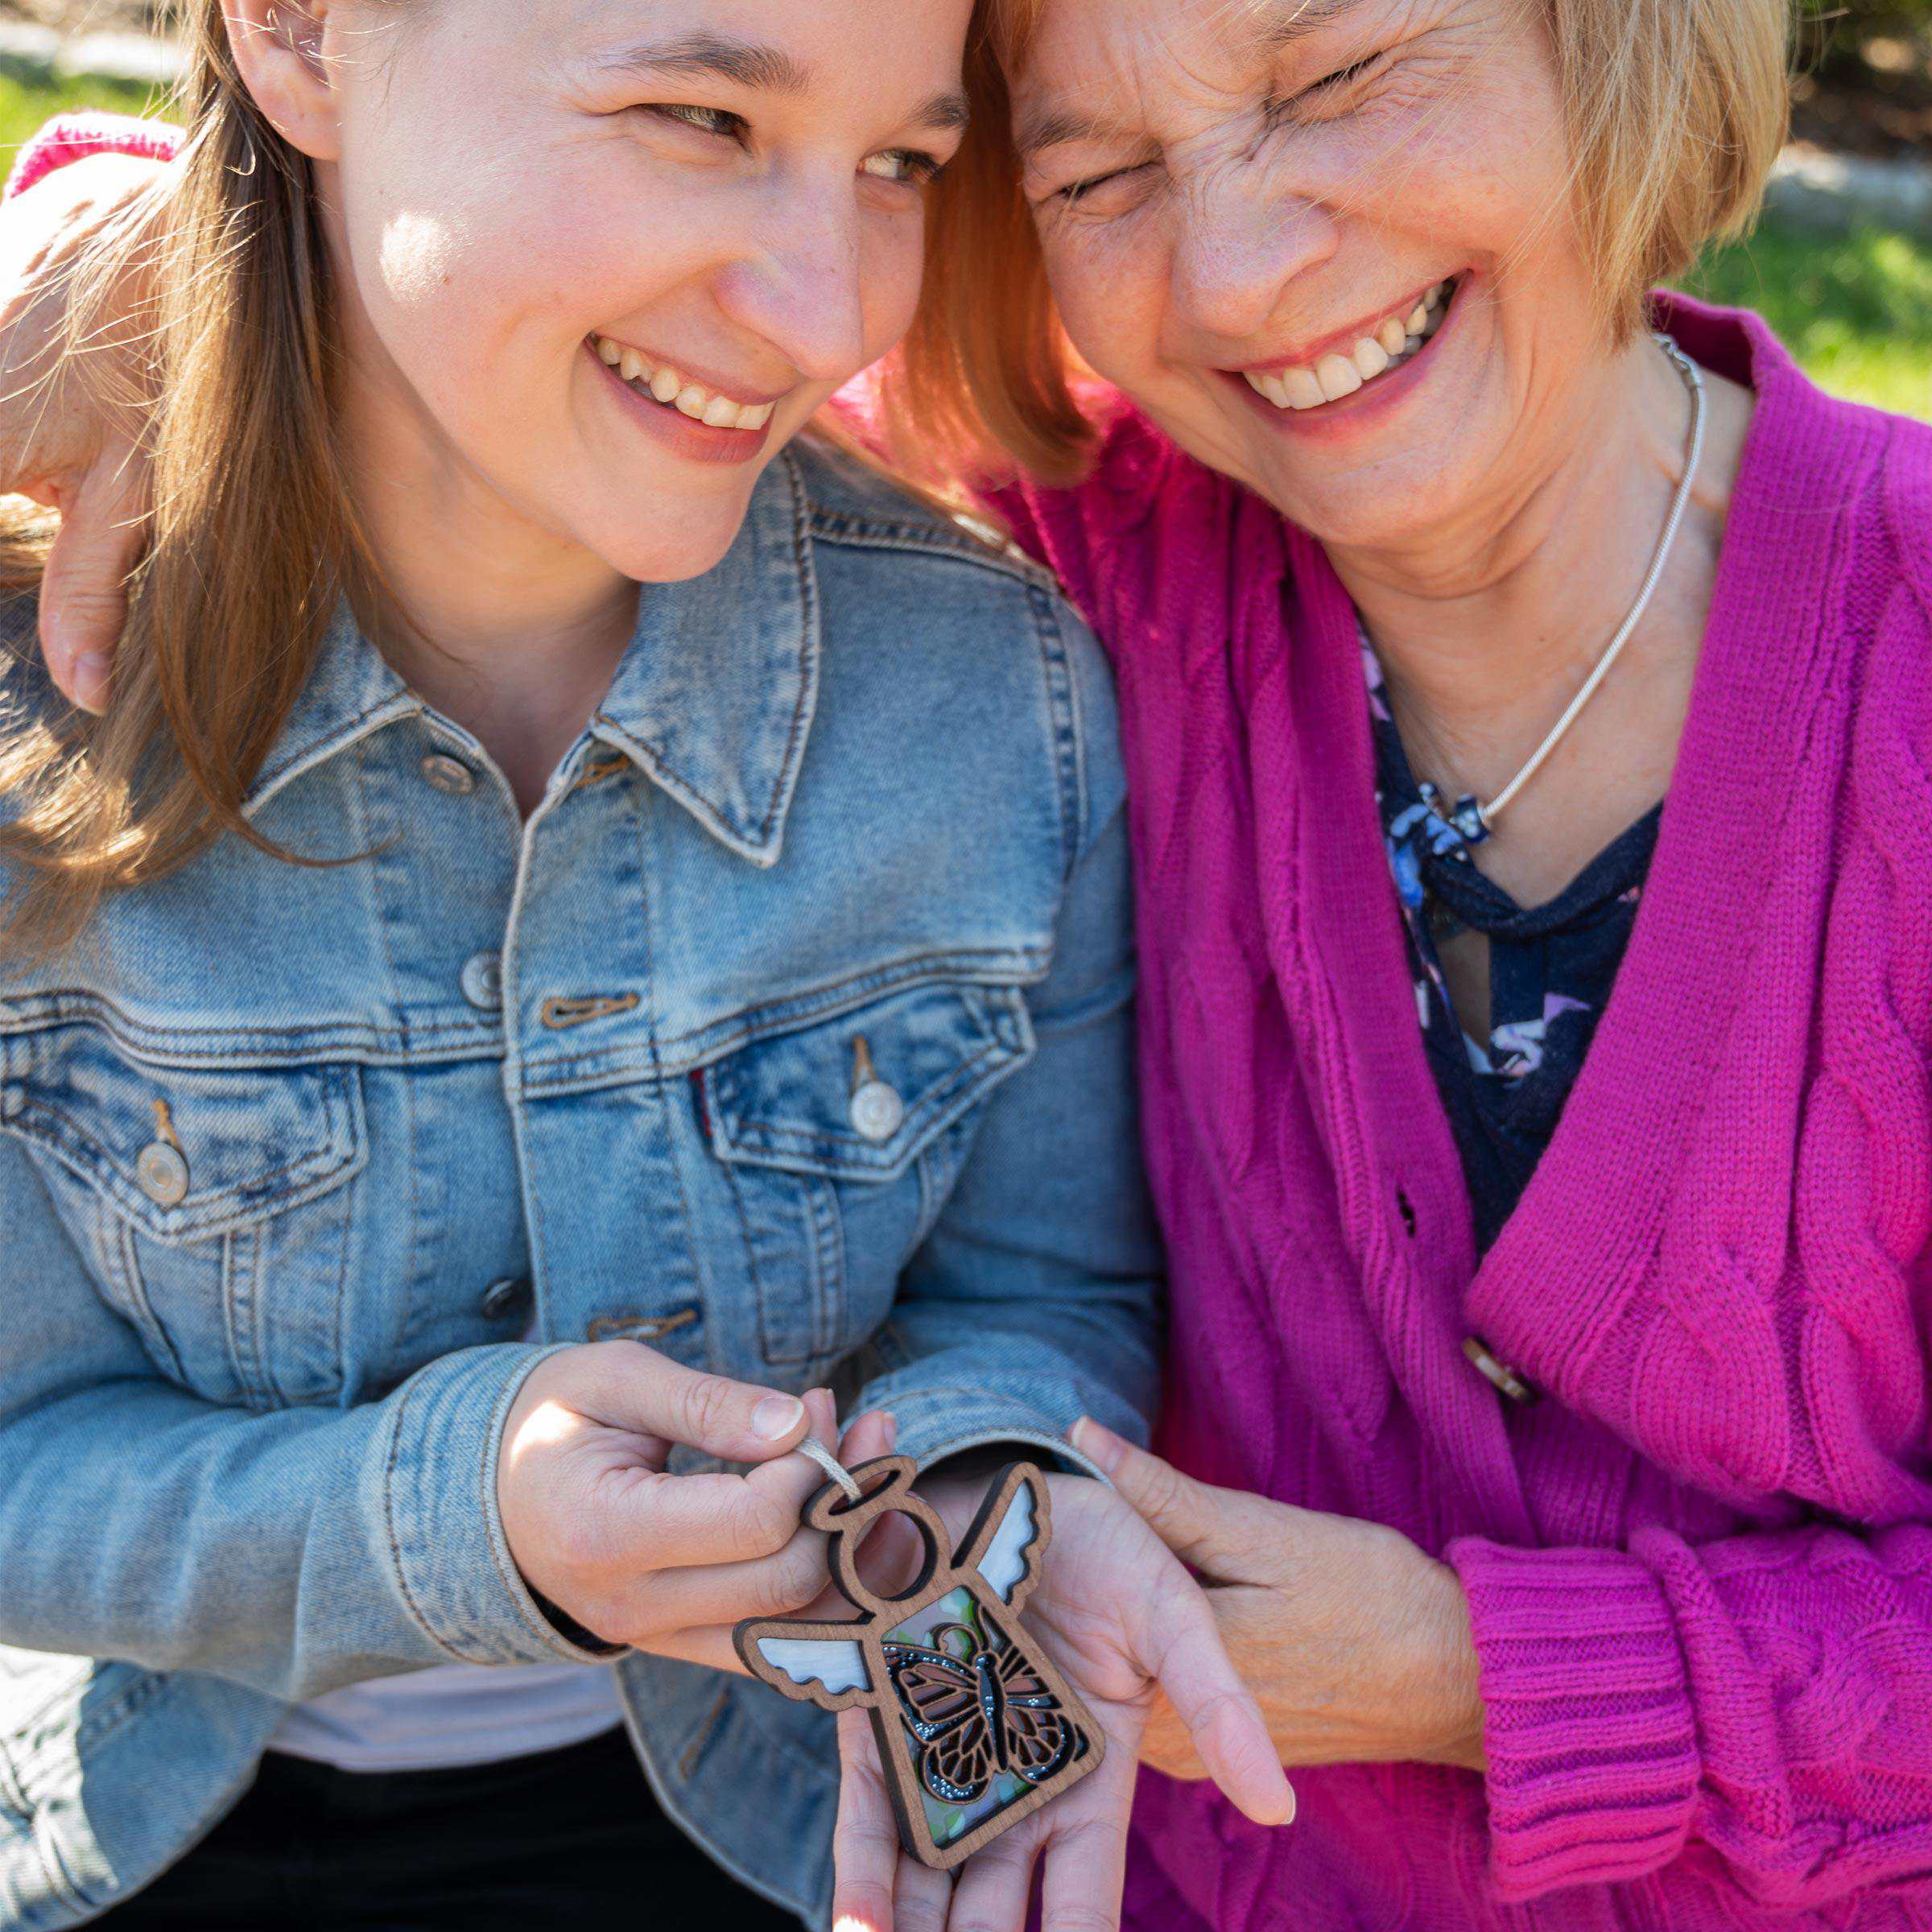 A mother and daughter giggling over a monarch butterfly angel figurine gift